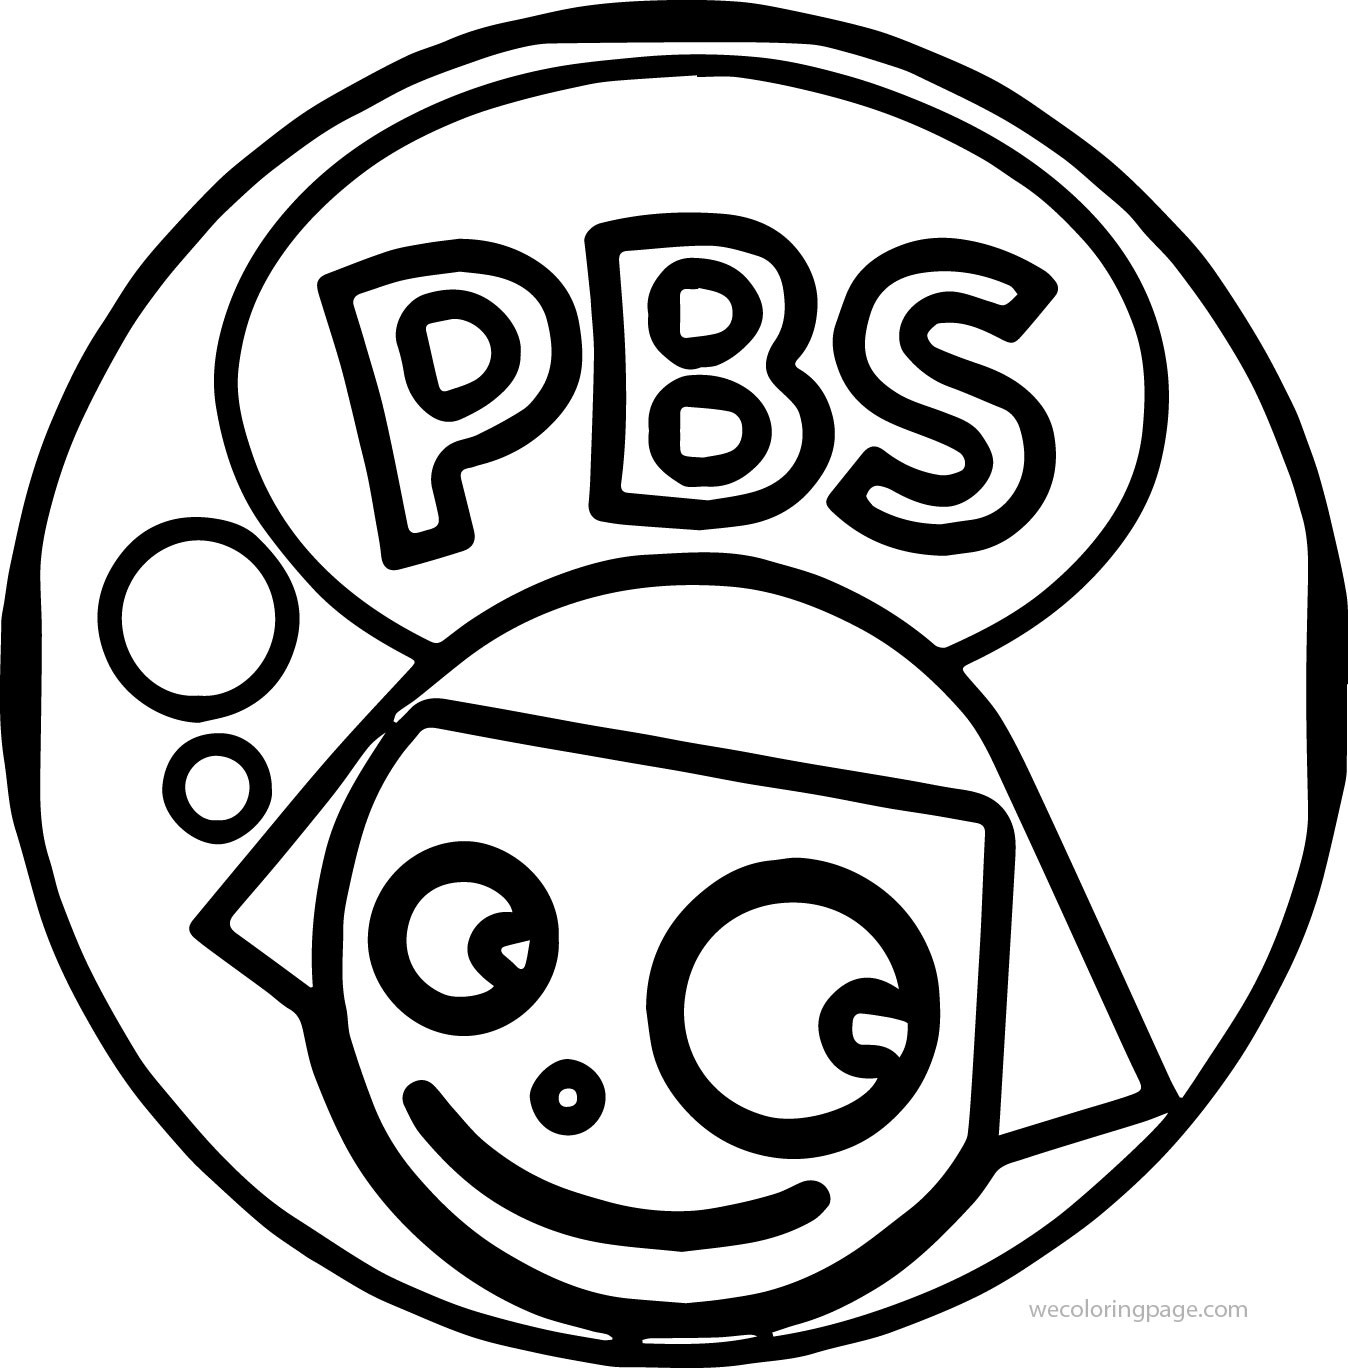 Pbs Kids Coloring Pages
 PBS Kids Dot Girl Circle Coloring Page